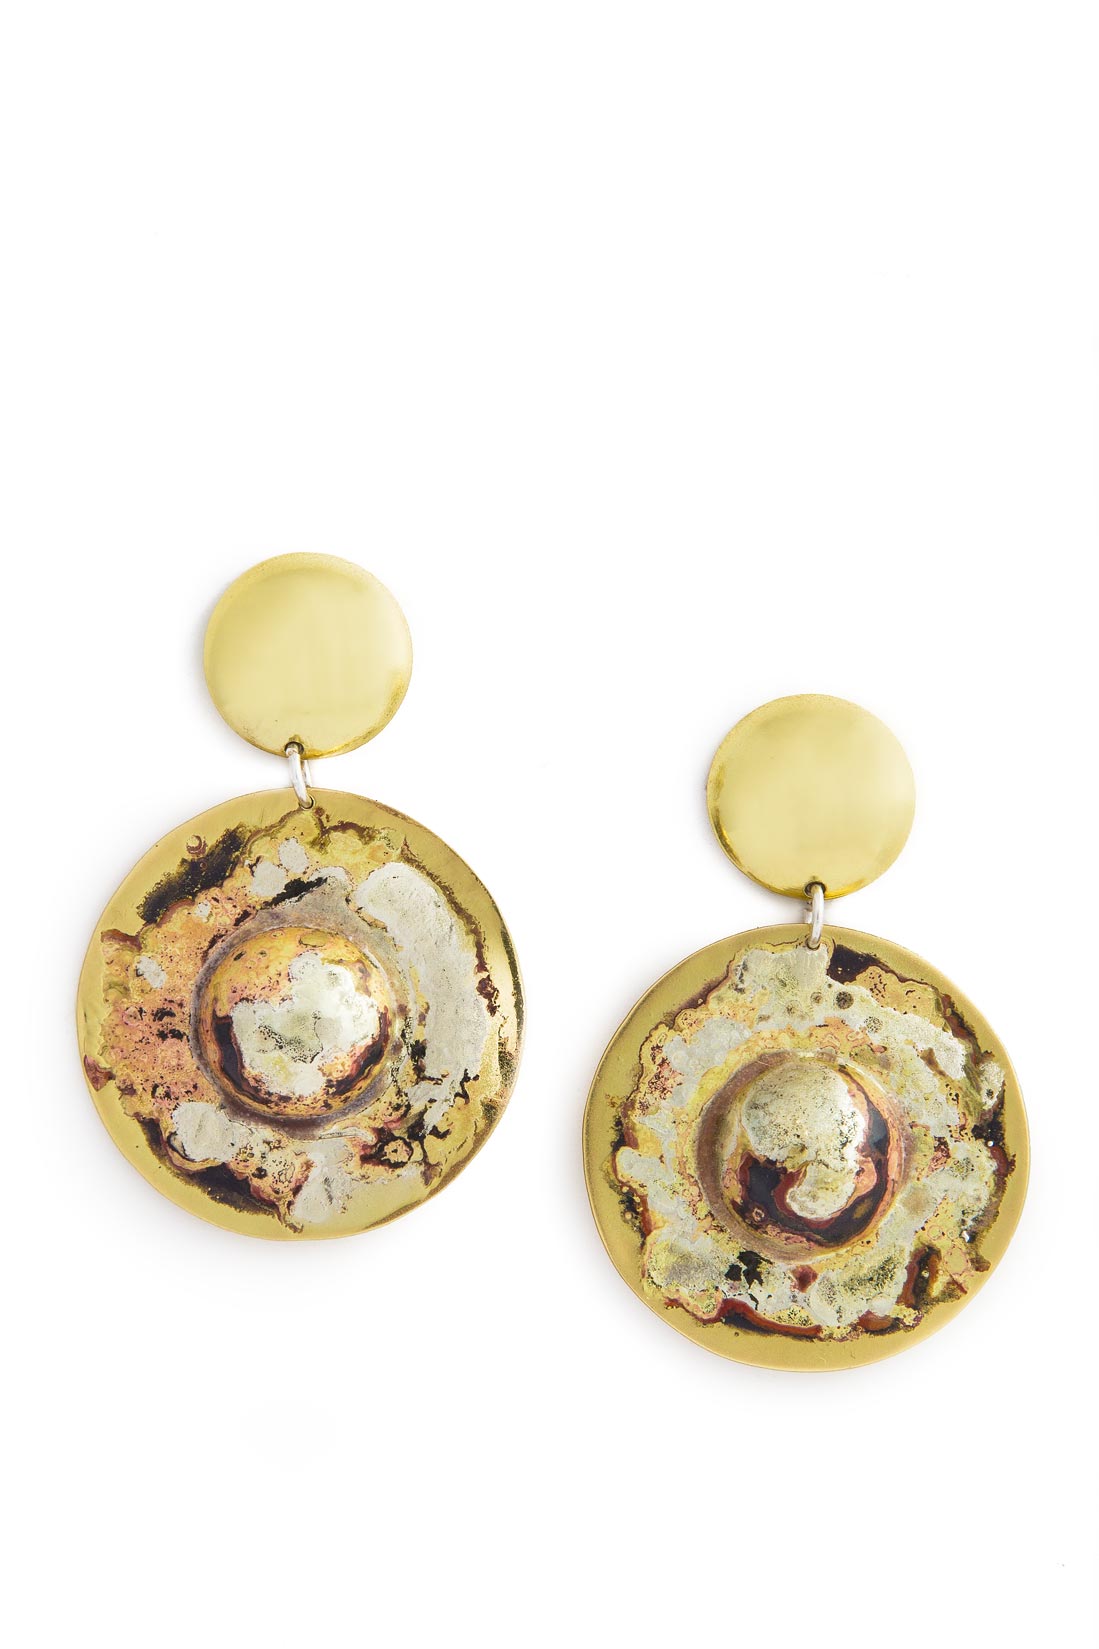 Silver and Brass Round Earrings  Eneada image 0